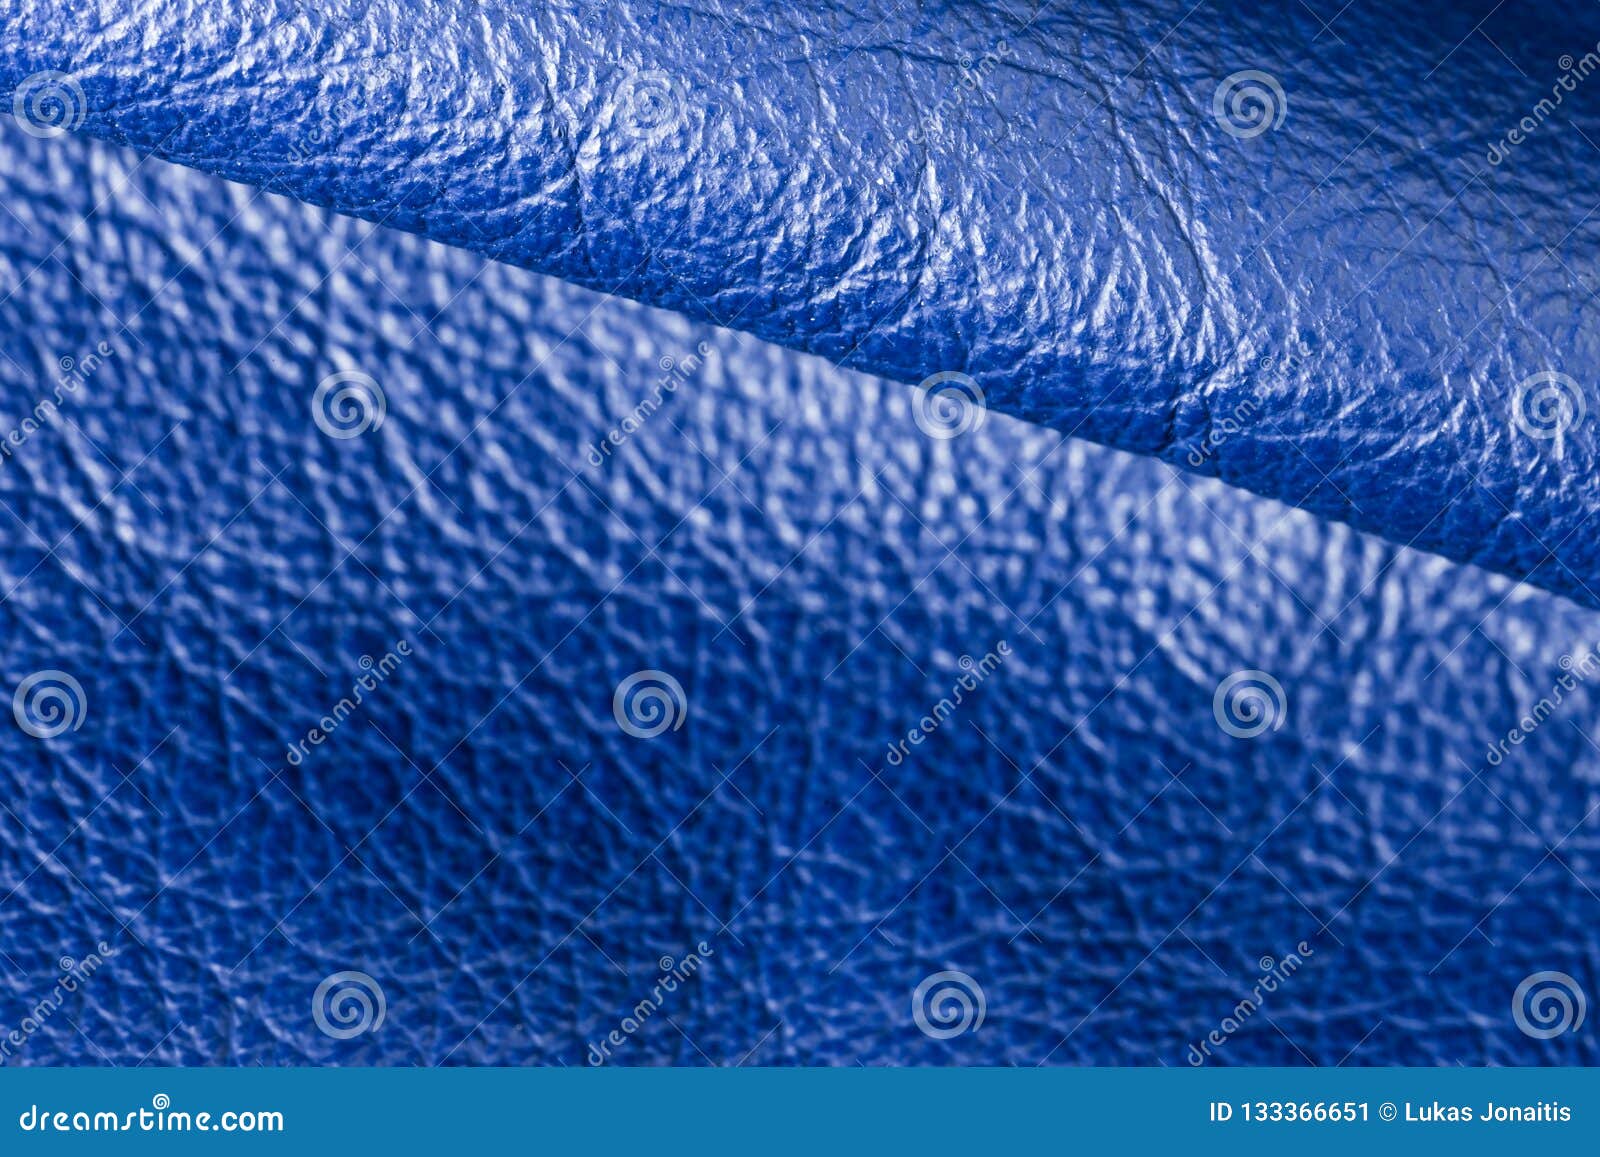 Dark Blue Leather for Concept and Idea Style of Fine Leather Crafting ...